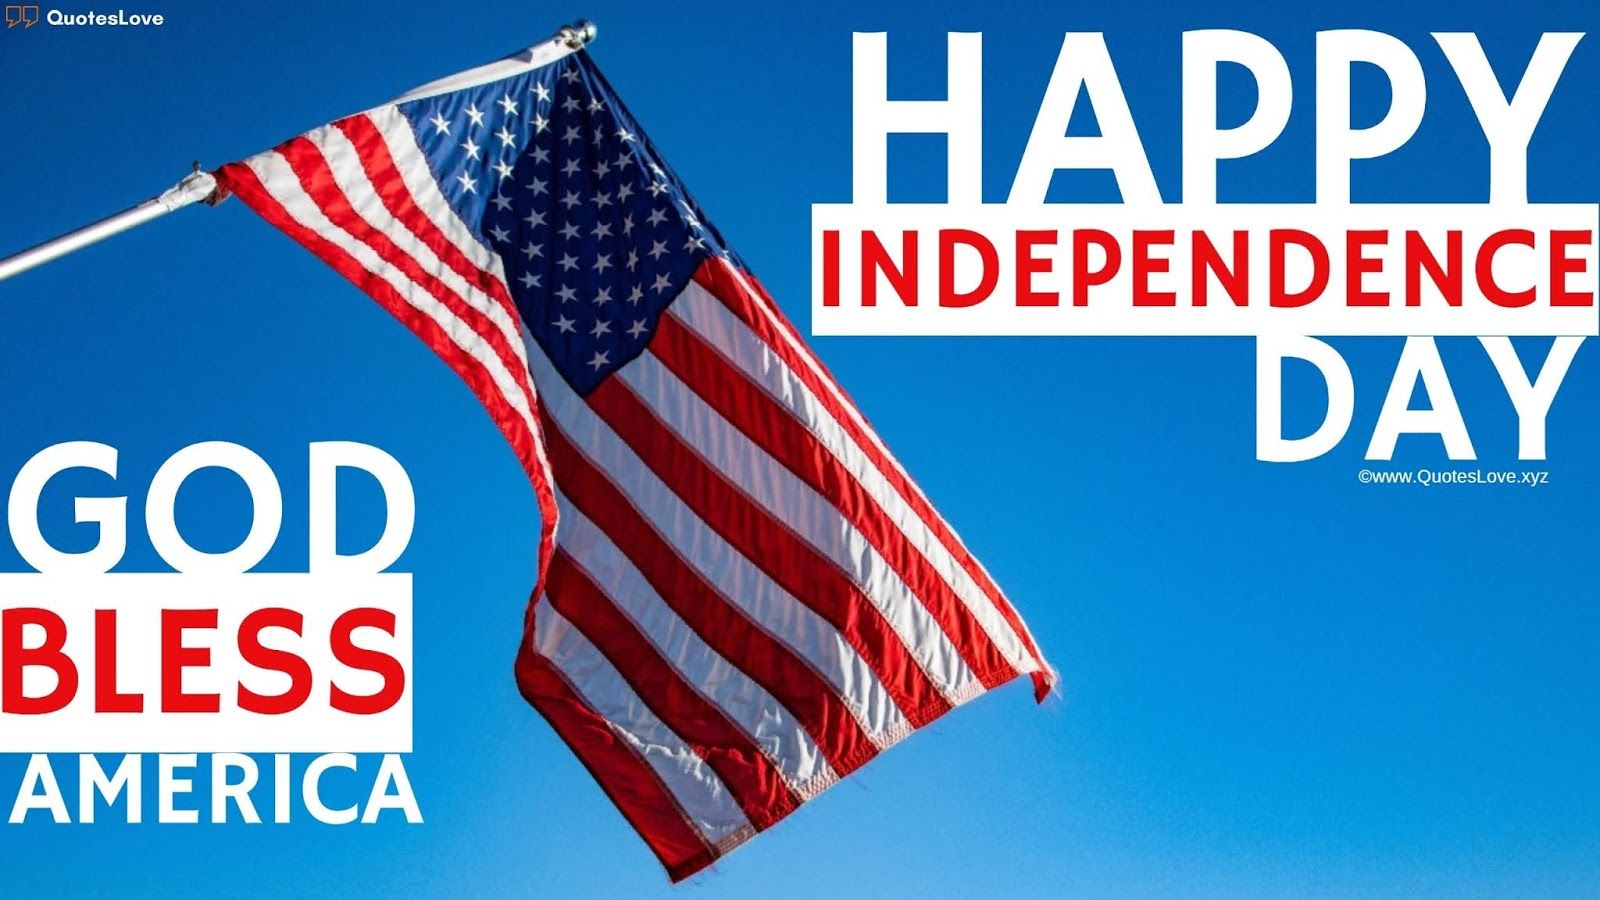 Best] 45 [United States] Independence Day 2020: Quotes, Wishes, Messages, Greetings, Sayings, Image, Picture, Poster, Wallpaper